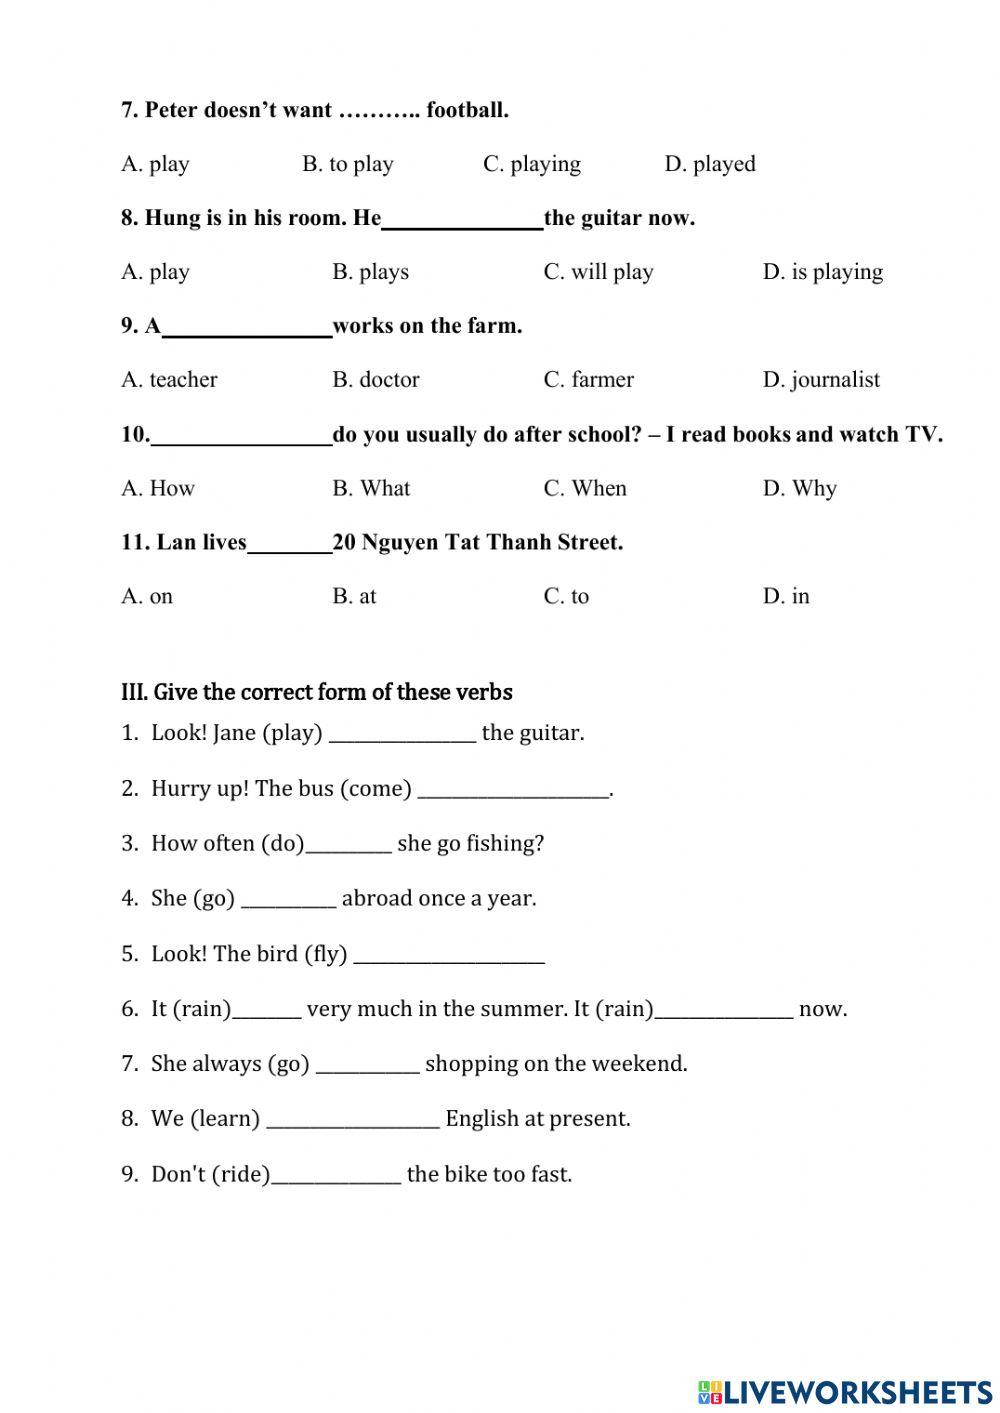 Grade 5 - Review Mid-Term Test 2